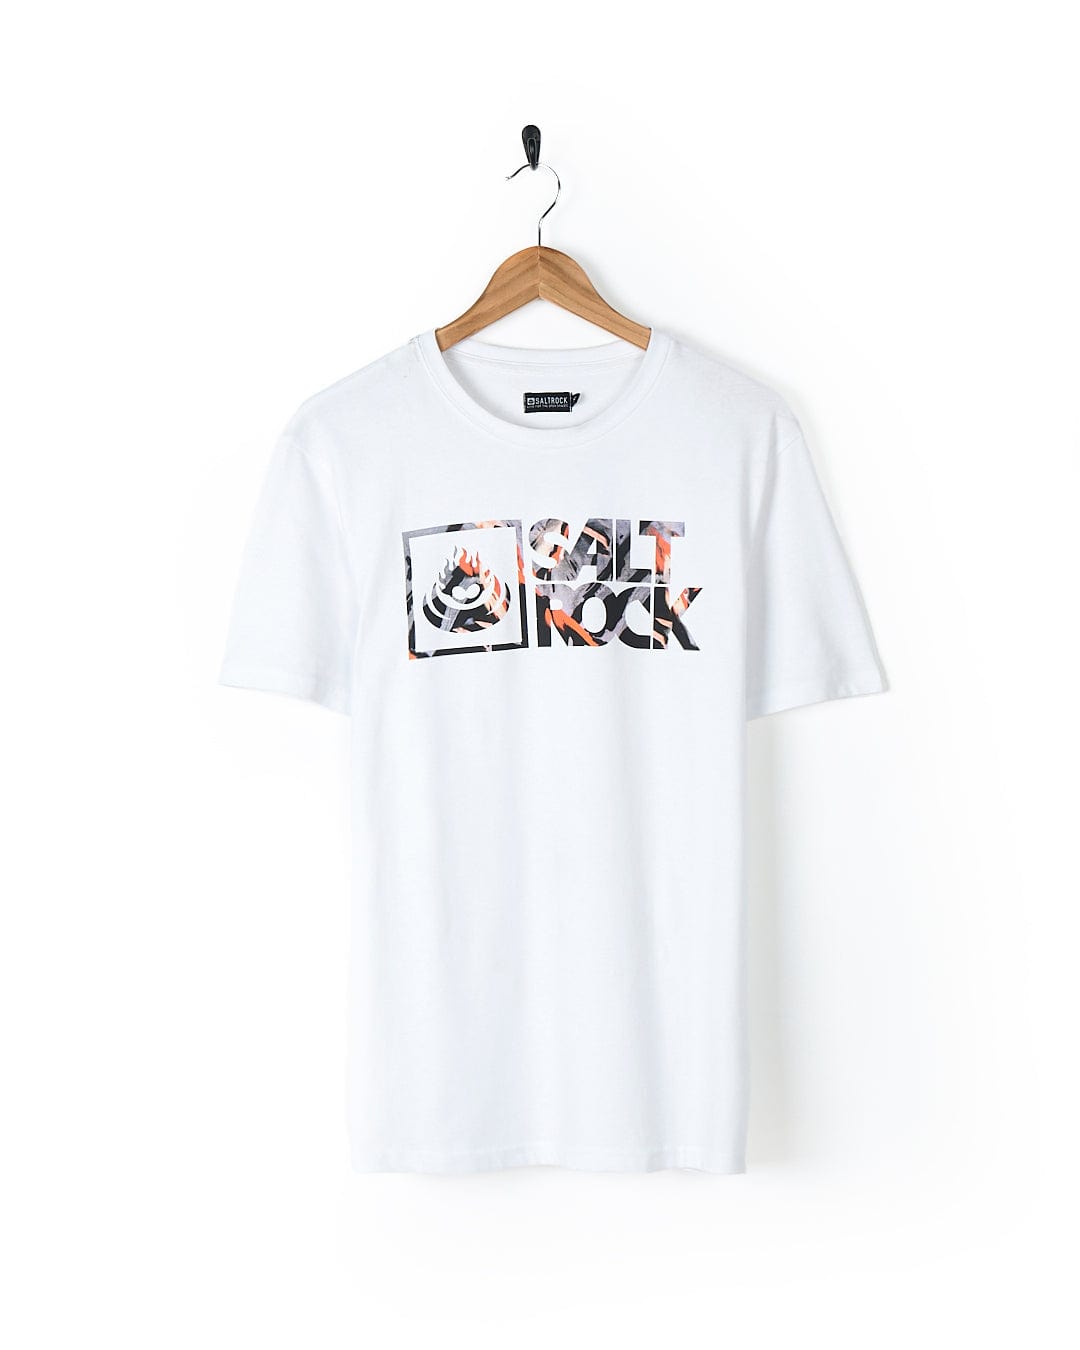 A white Mountain Logo - Mens Short Sleeve T-Shirt - White with the word rock on it, featuring the Saltrock branding.